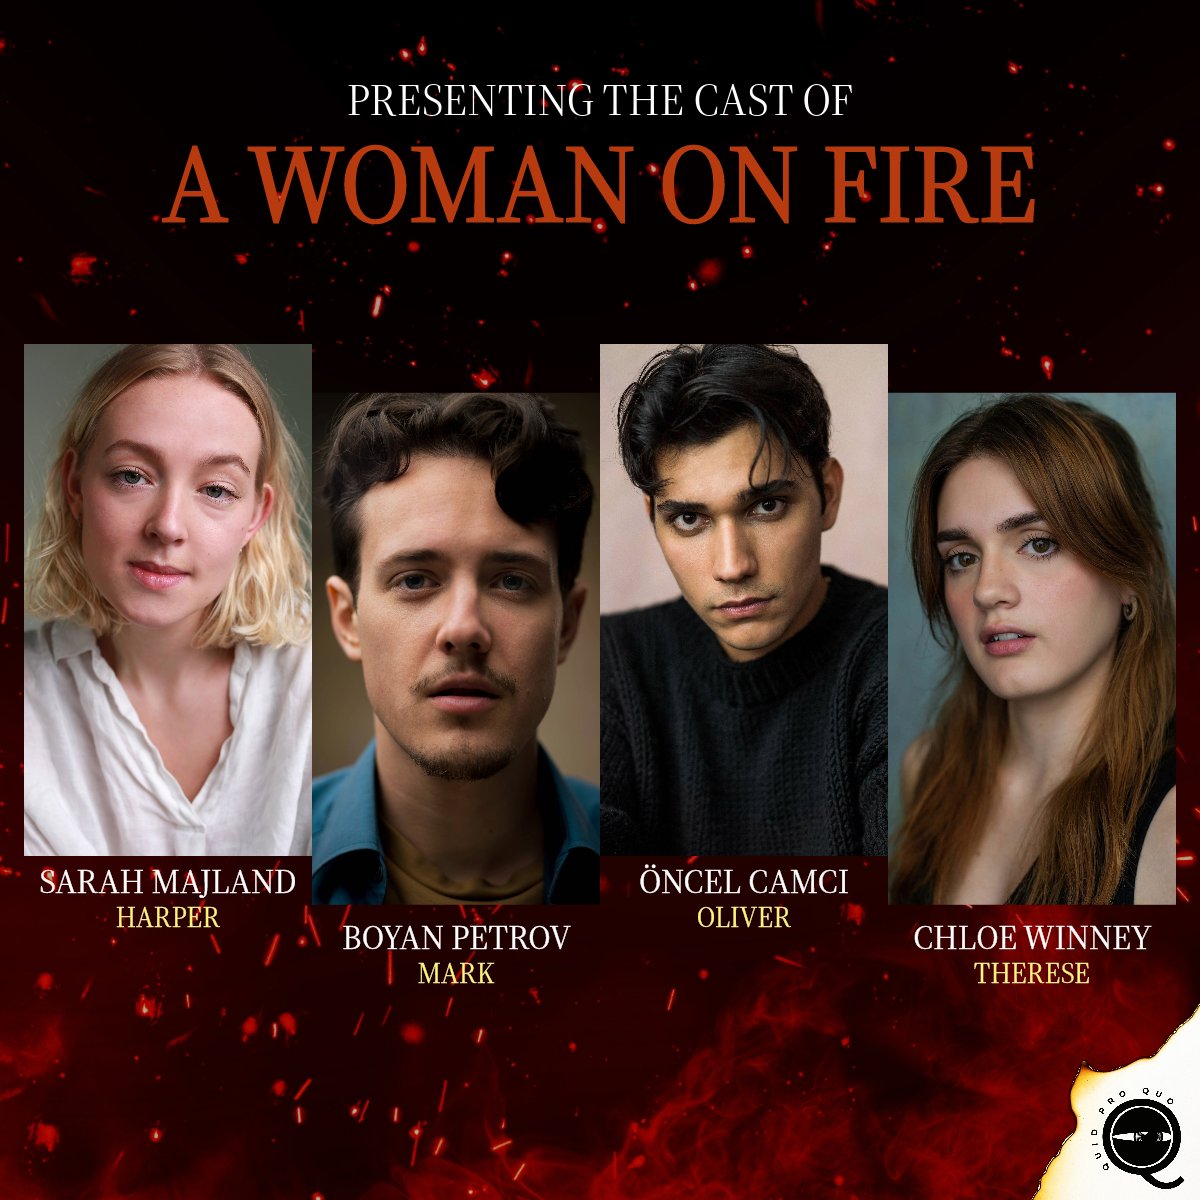 Cast Announcement!!!

All four recently graduated from East 15 Acting School, we are delighted to finally bring you the official cast of A Woman on Fire!

#offwestend #fringetheatre #londonfringe #londontheatre #whatsonlondon #newwriting #theatremakers #baronscourttheatre